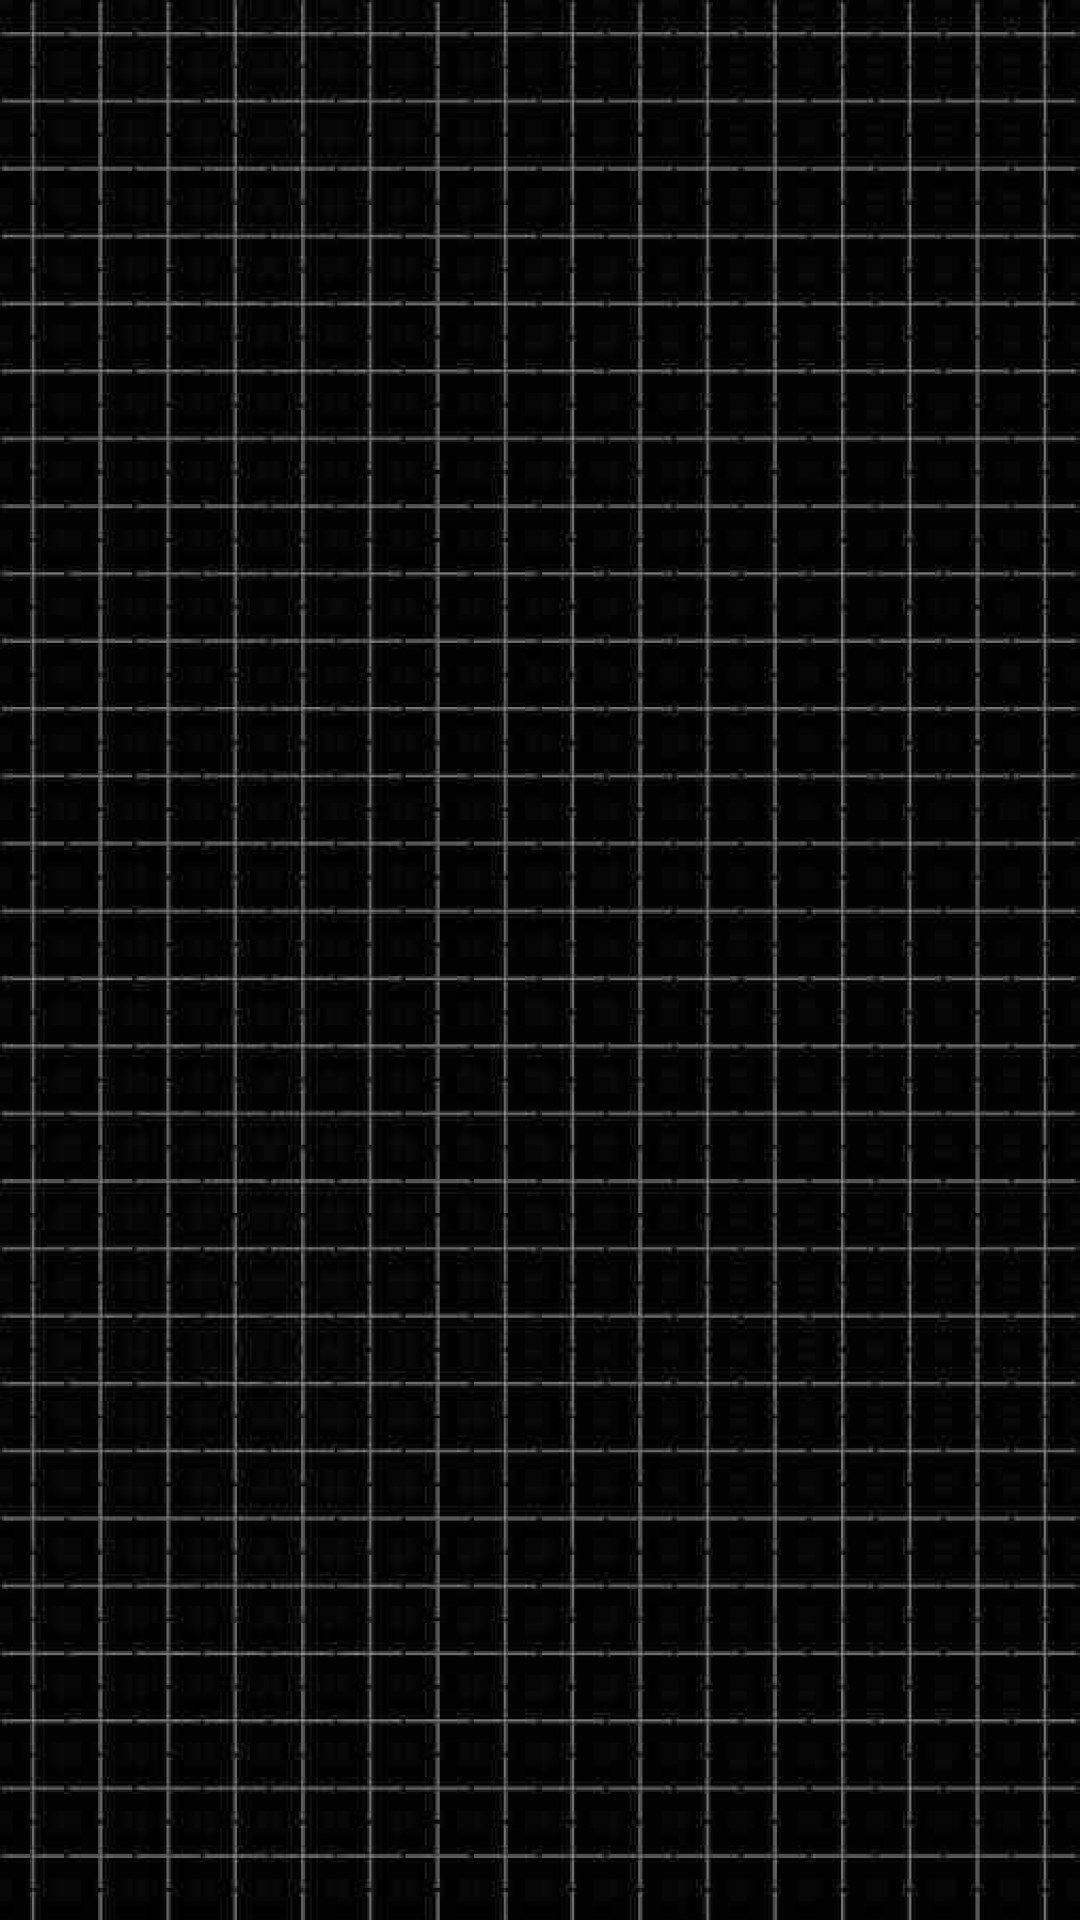 A black and white screen with lines - Grid